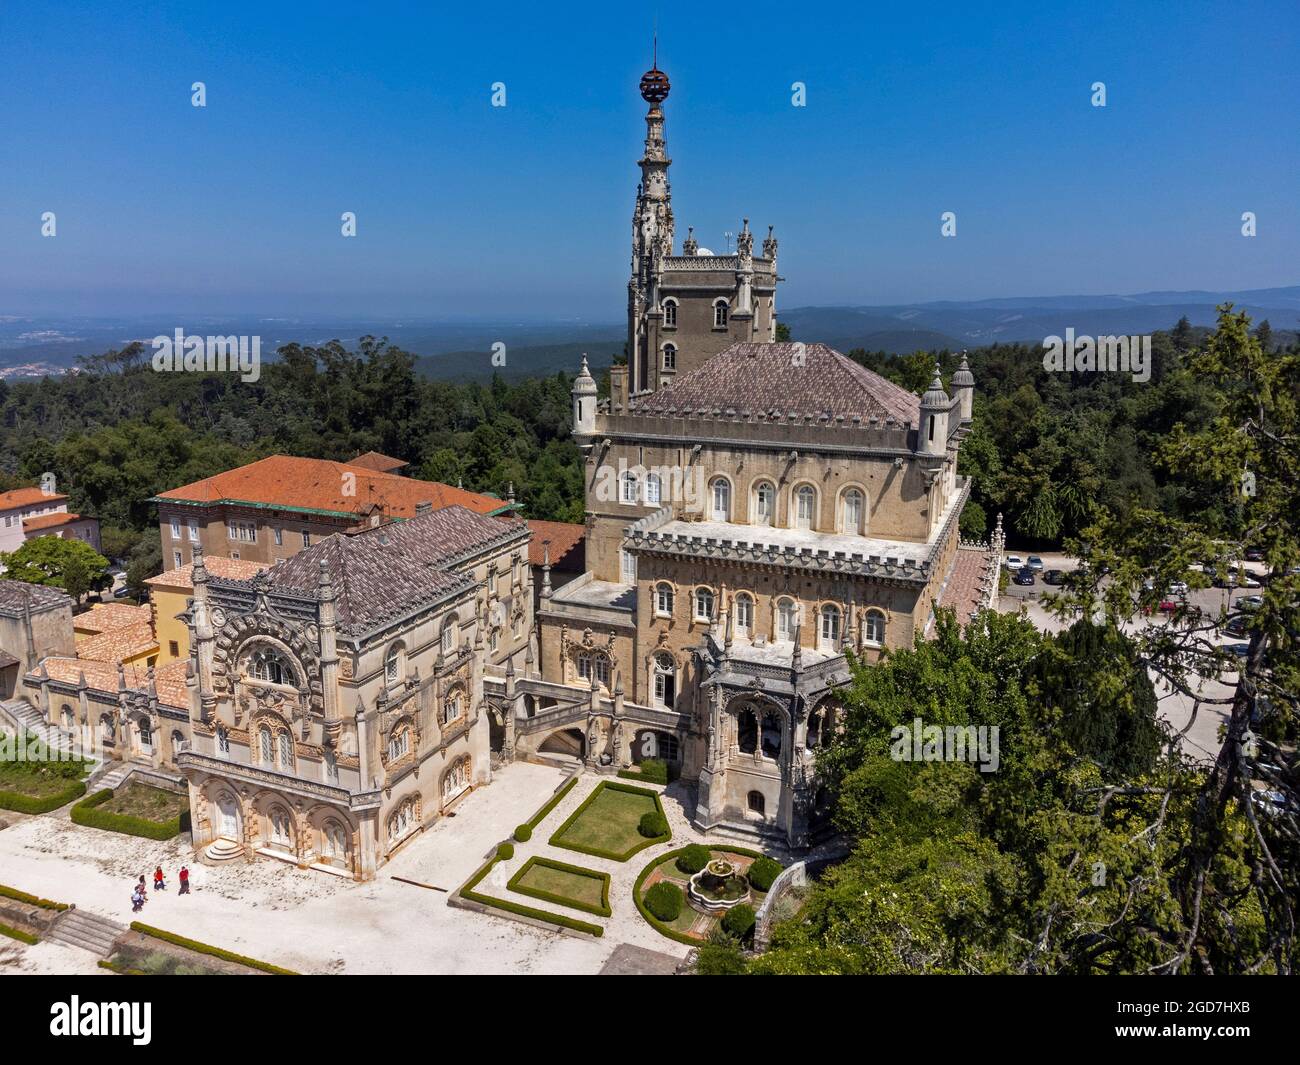 Aerial view of the Bussaco Palace Hotel, Serra do Bussaco, Portugal Stock Photo